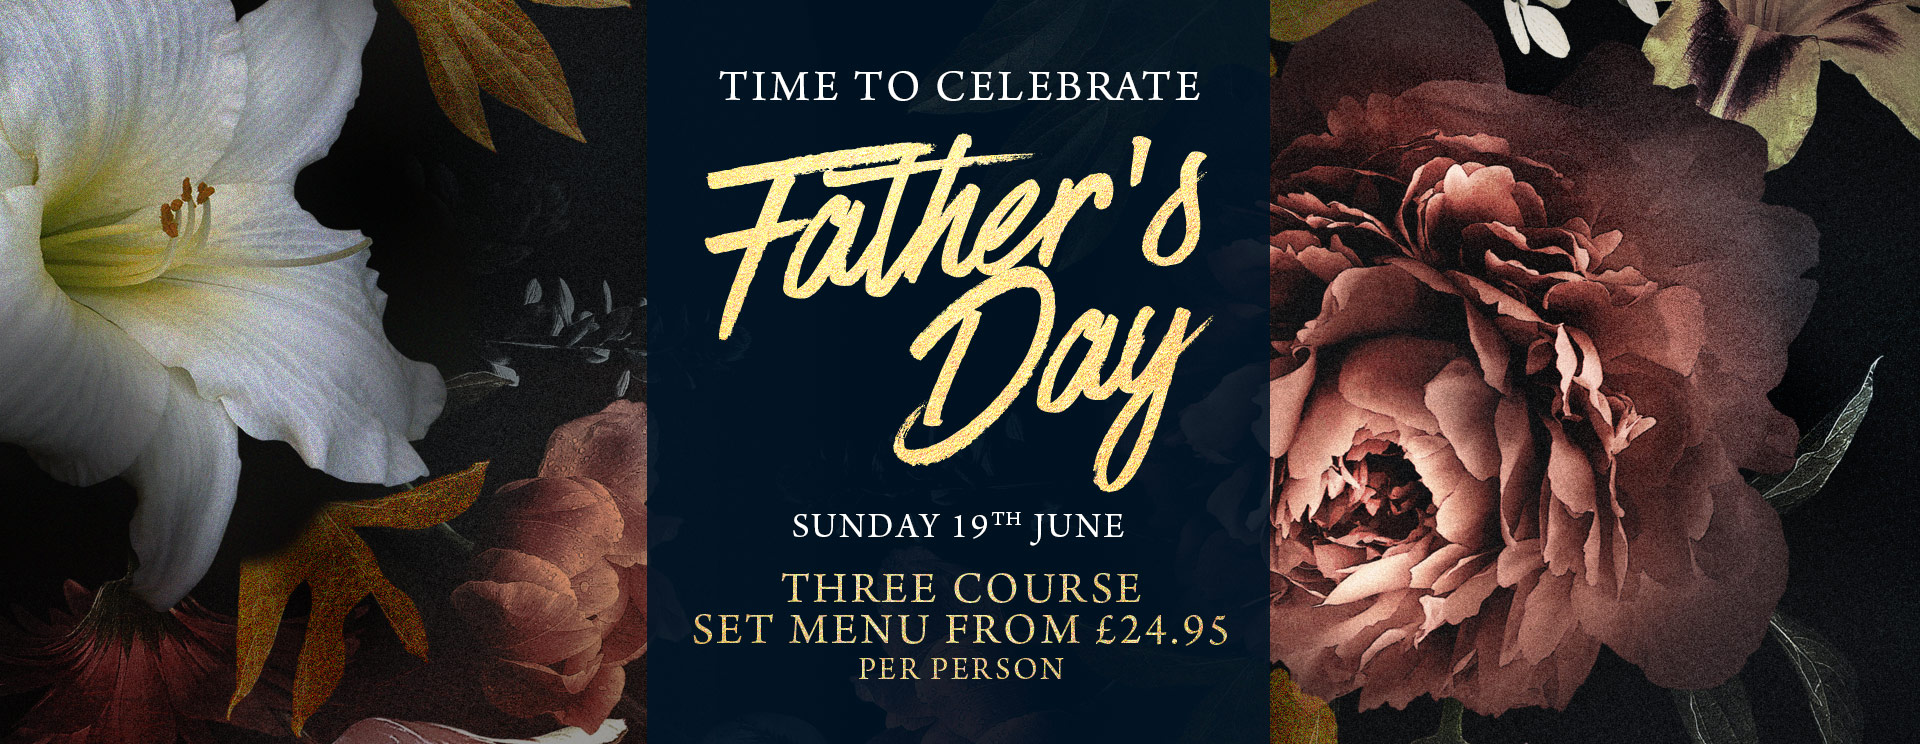 Fathers Day at The Kings Arms